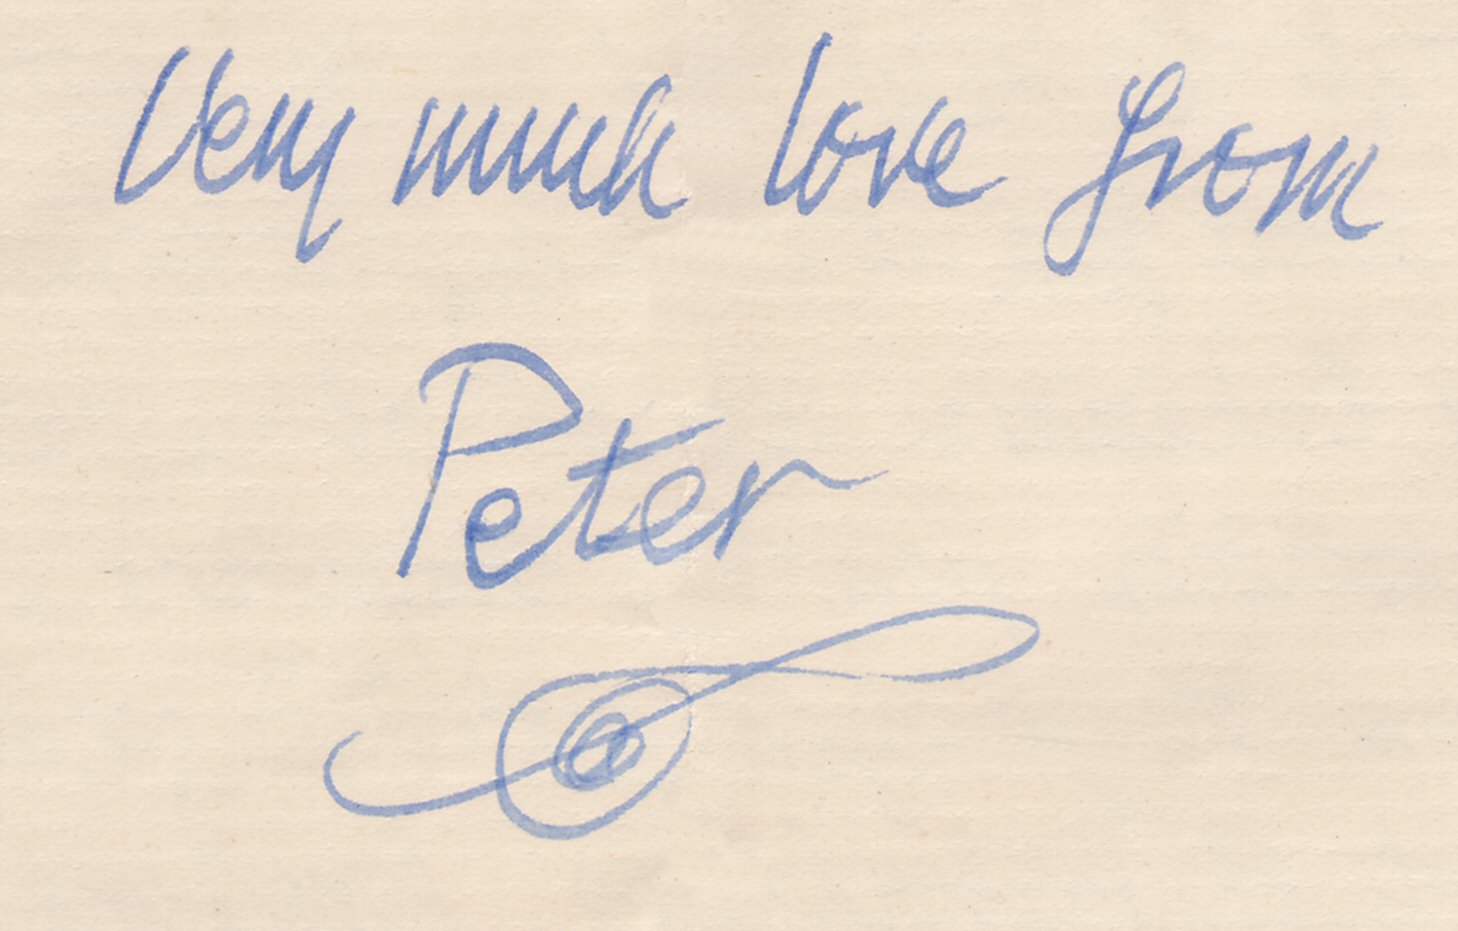 Peter Tranchell's signature and characteristic horizontal treble clef, from a family letter